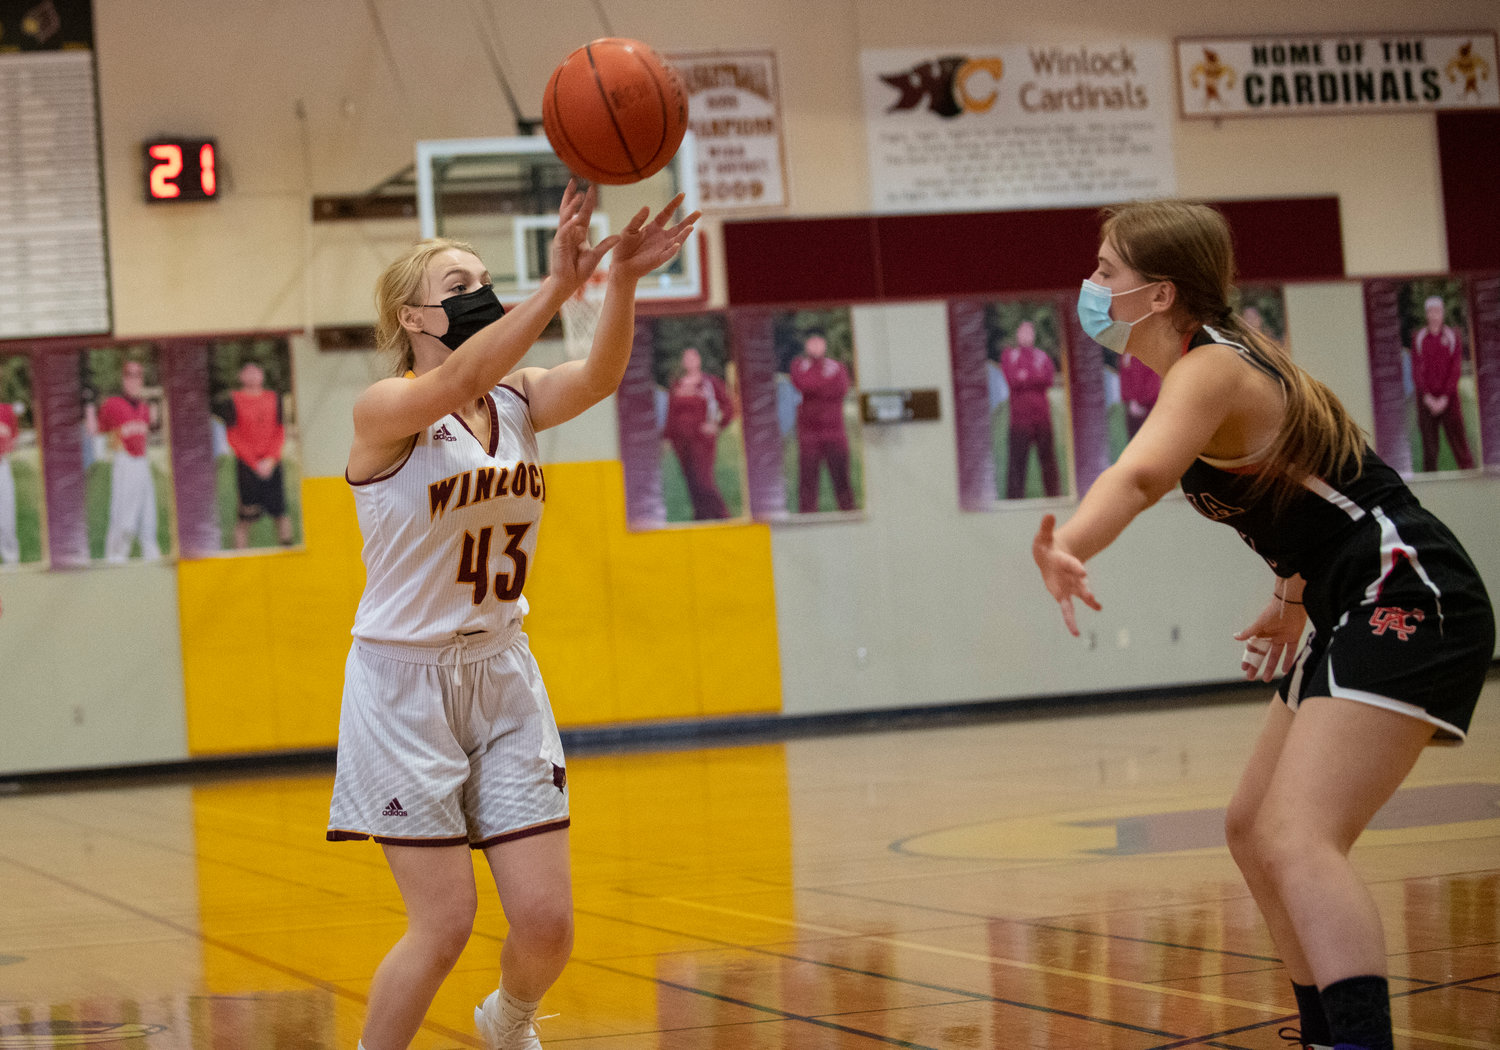 Winlock junior Maia Chaney (43) throws a pass into the paint against Kalama.